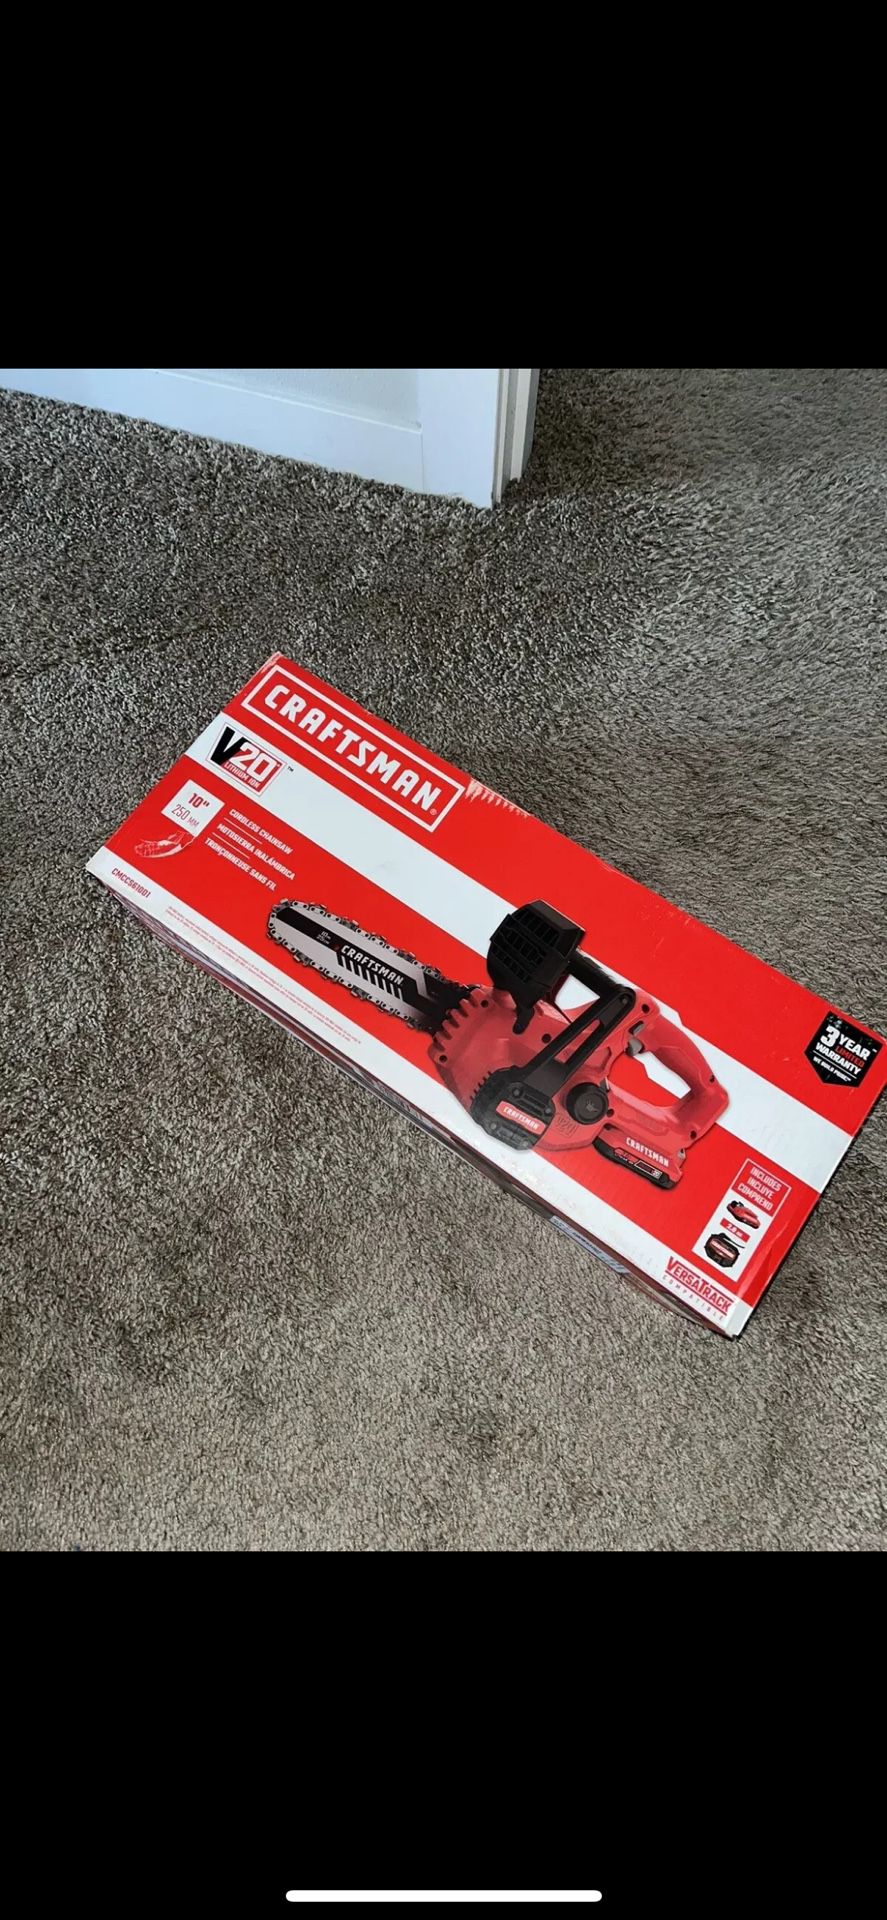 CRAFTSMAN V20 Cordless Chainsaw, Battery and Charger included (CMCCS610D1) Brand new In Box 